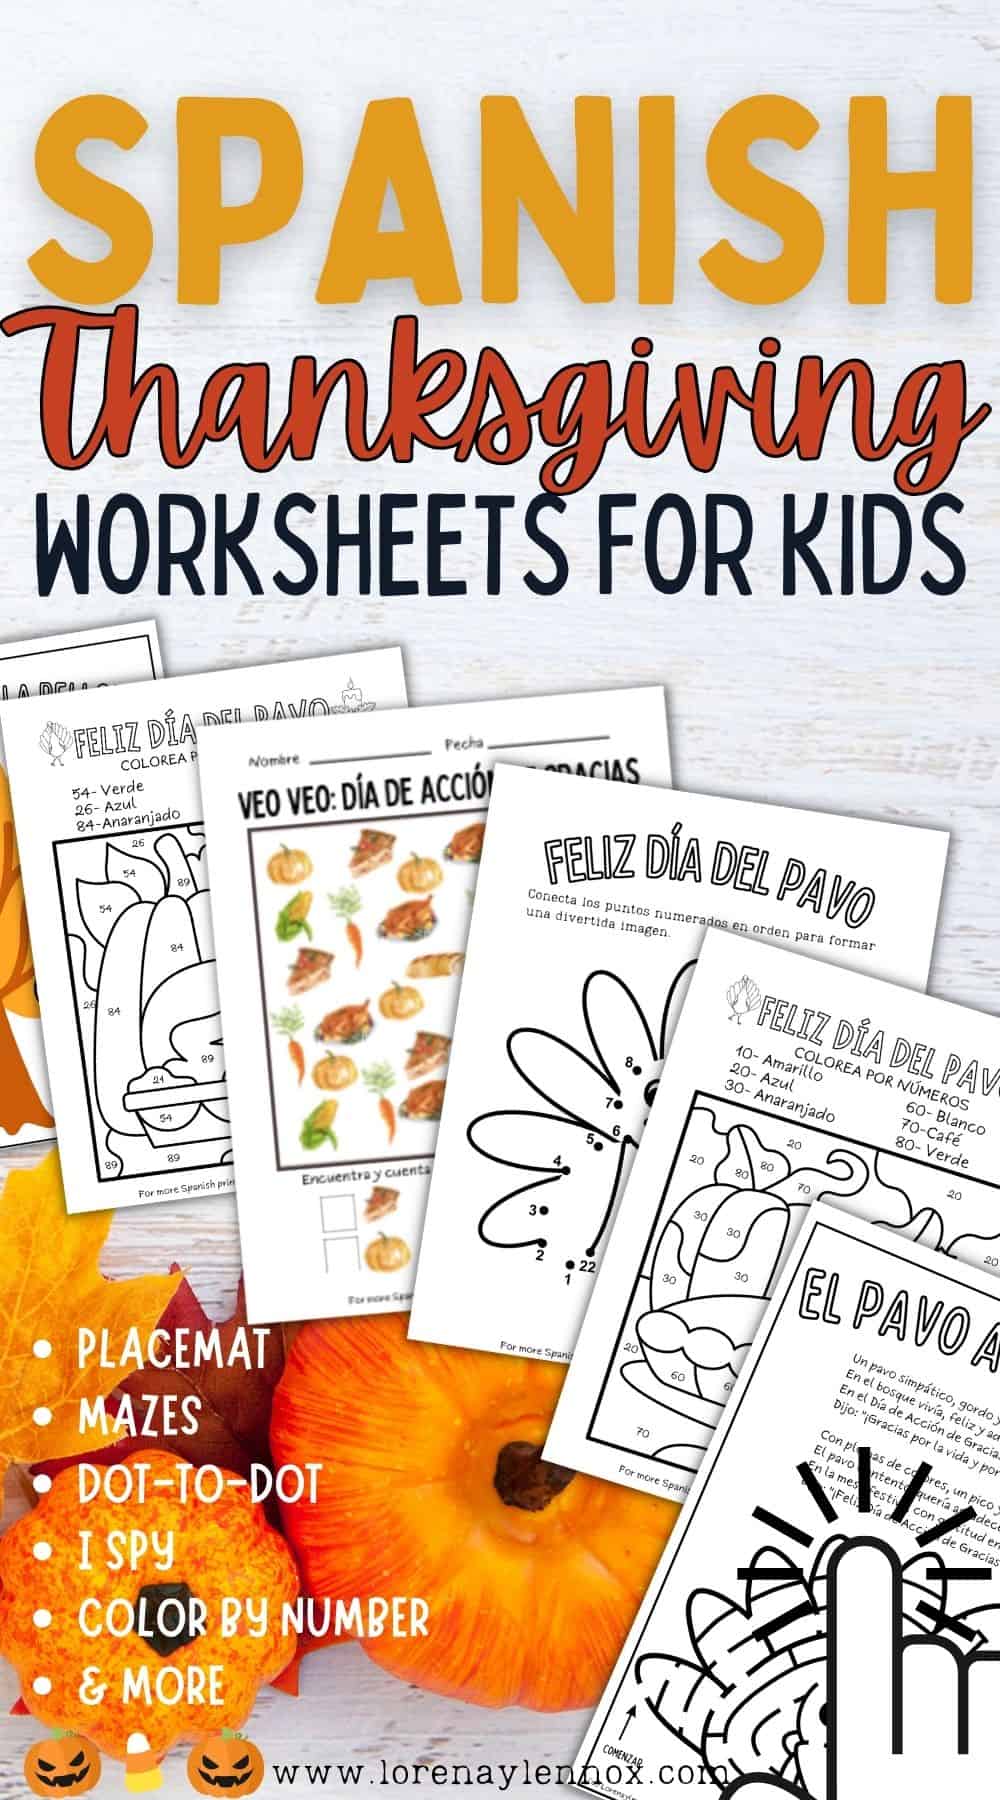 Explore a world of educational fun with our Thanksgiving Spanish Worksheets! From word scrambles to coloring pages, these engaging printables in Spanish will add a bilingual twist to your holiday celebrations. Don't miss out on this fantastic resource for language and holiday learning. #Thanksgiving #SpanishWorksheets #Education"